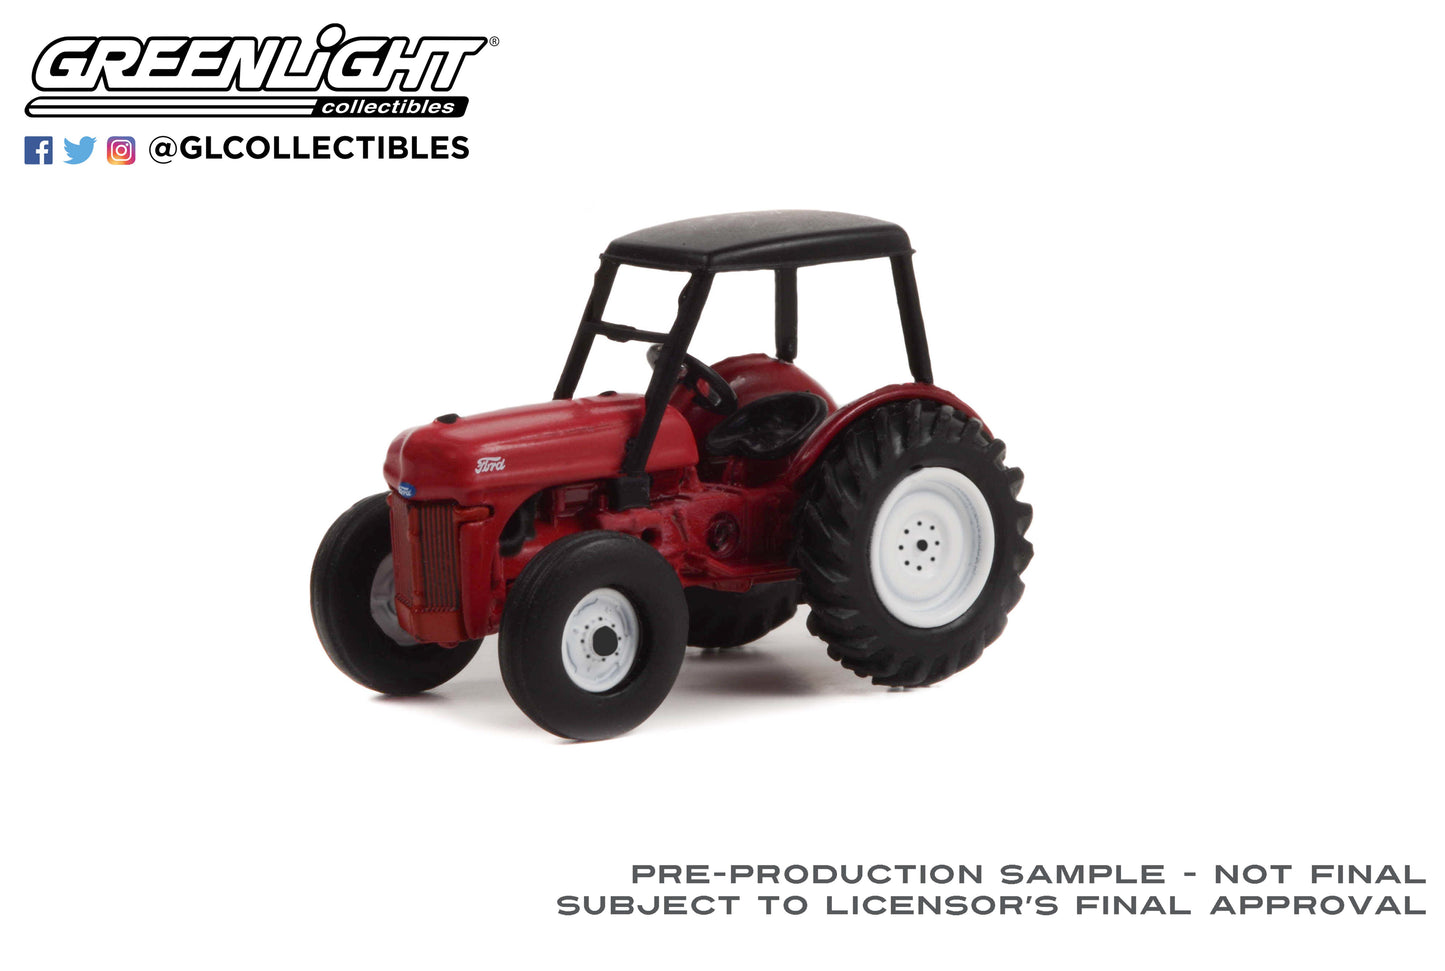 GreenLight 1:64 Down on the Farm Series 7 - 1946 Ford 8N Tractor - Red with Black Canopy 48070-B